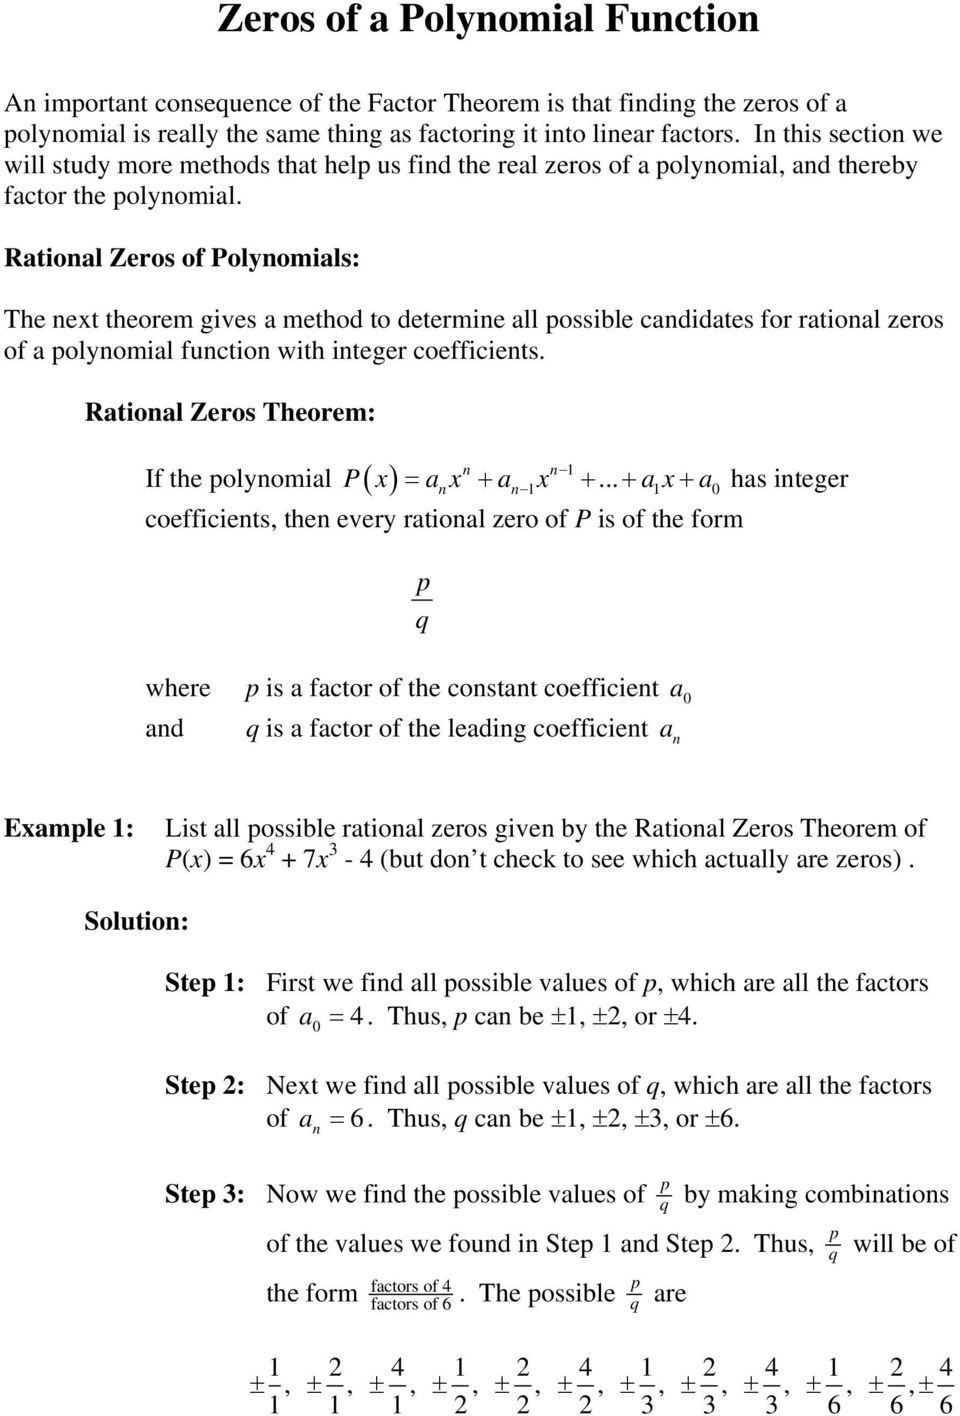 Rational Zeros of Polynomials: The next theorem gives a method to determine all possible candidates for rational zeros of a polynomial function with integer coefficients.